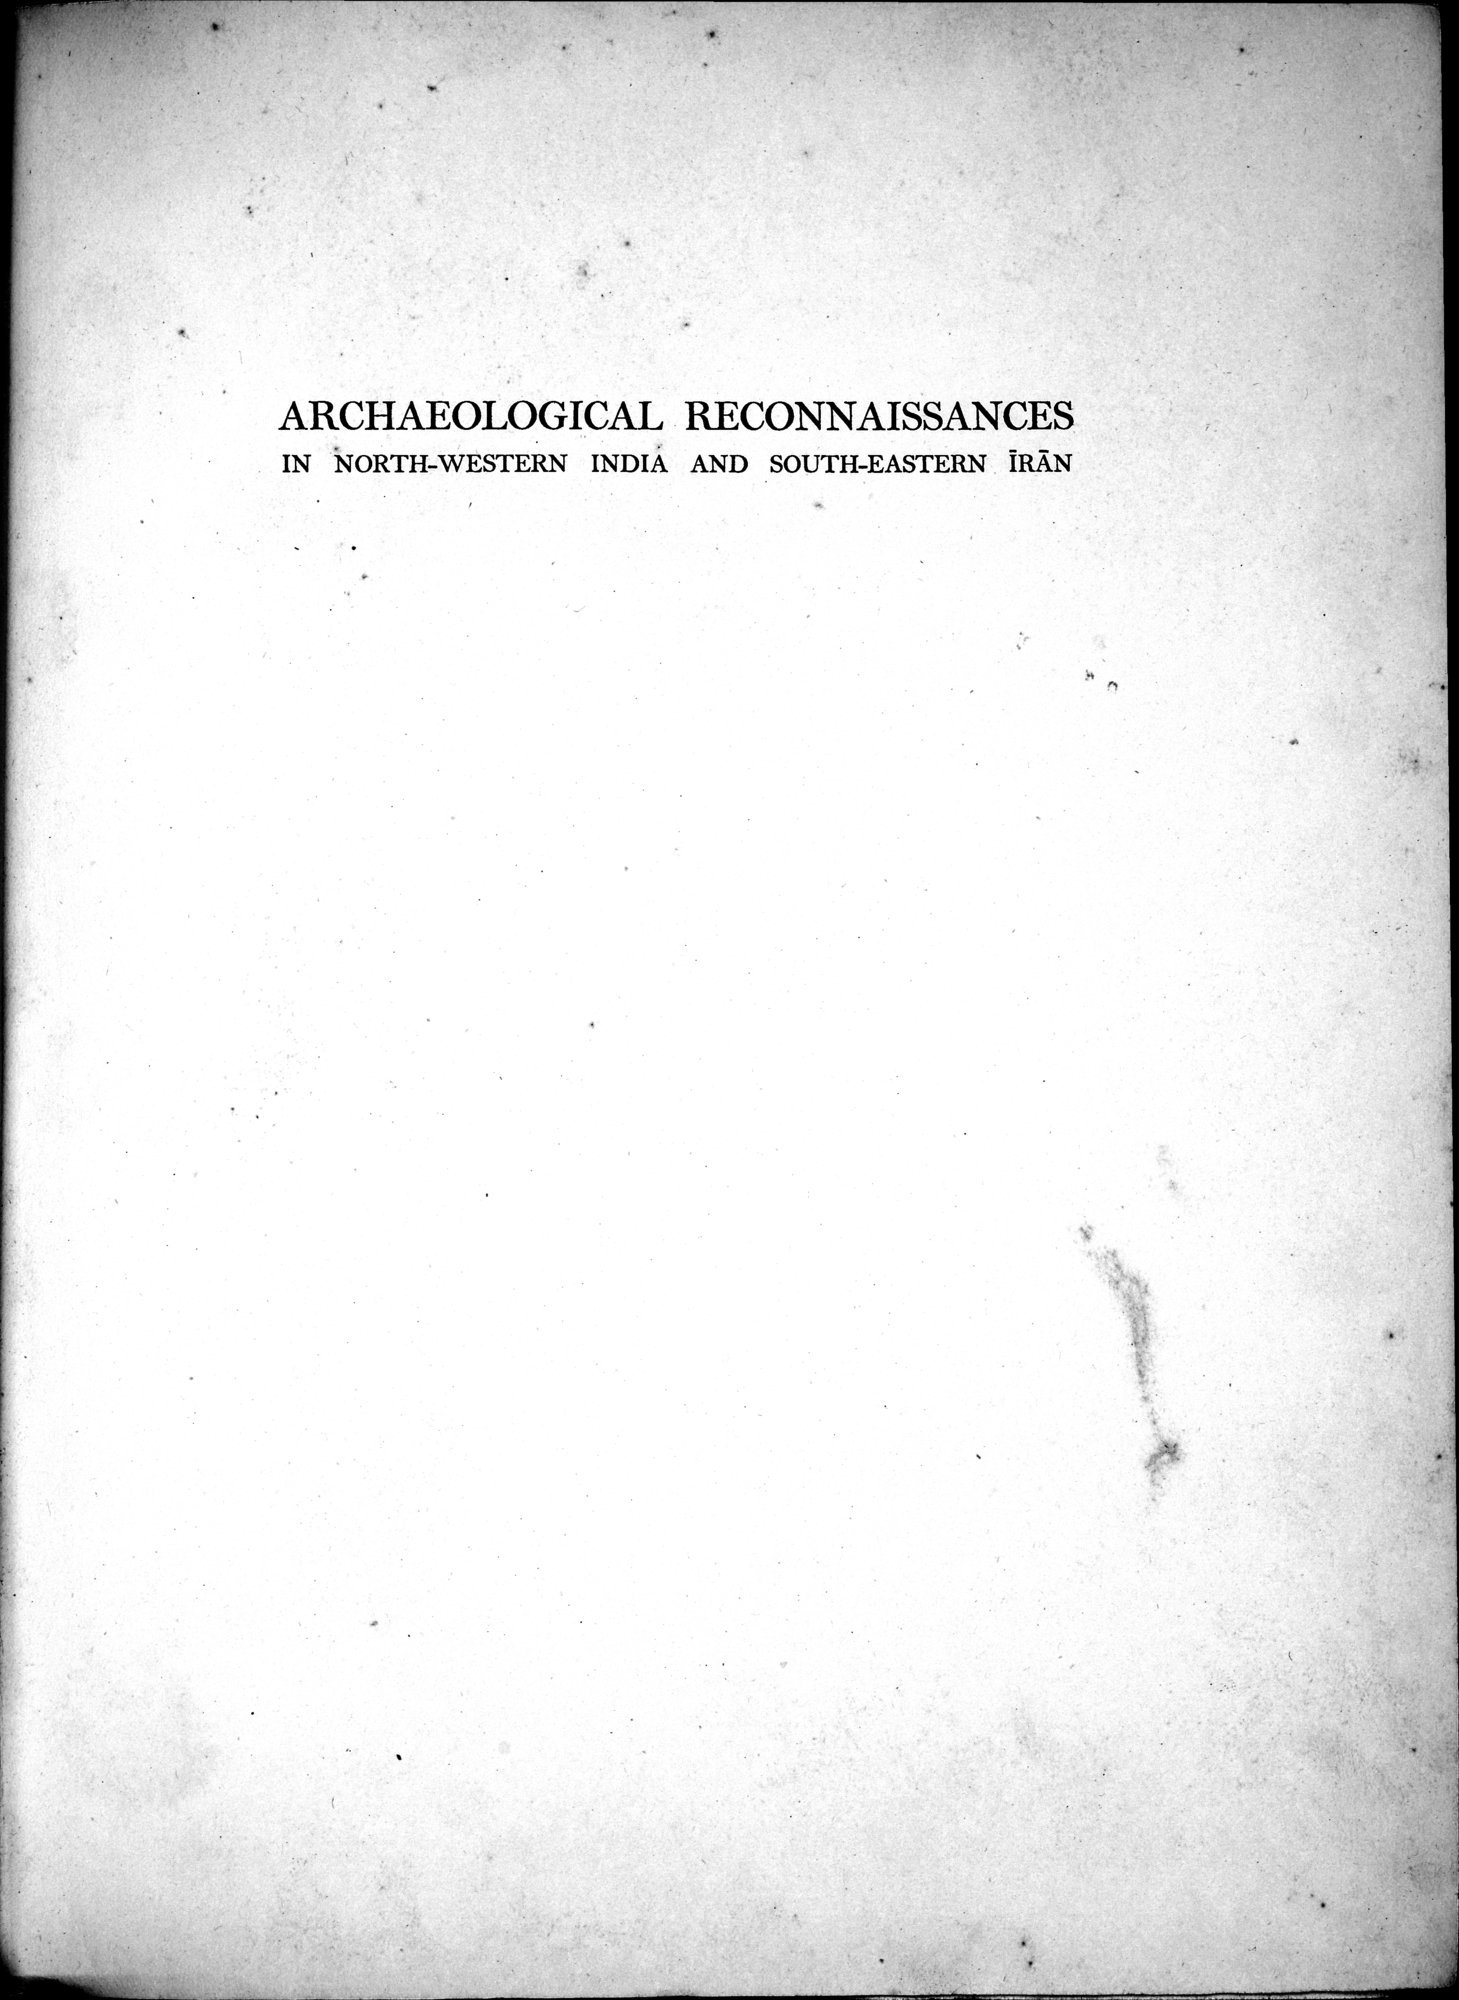 Archaeological Reconnaissances in North-Western India and South-Eastern Īrān : vol.1 / Page 5 (Grayscale High Resolution Image)